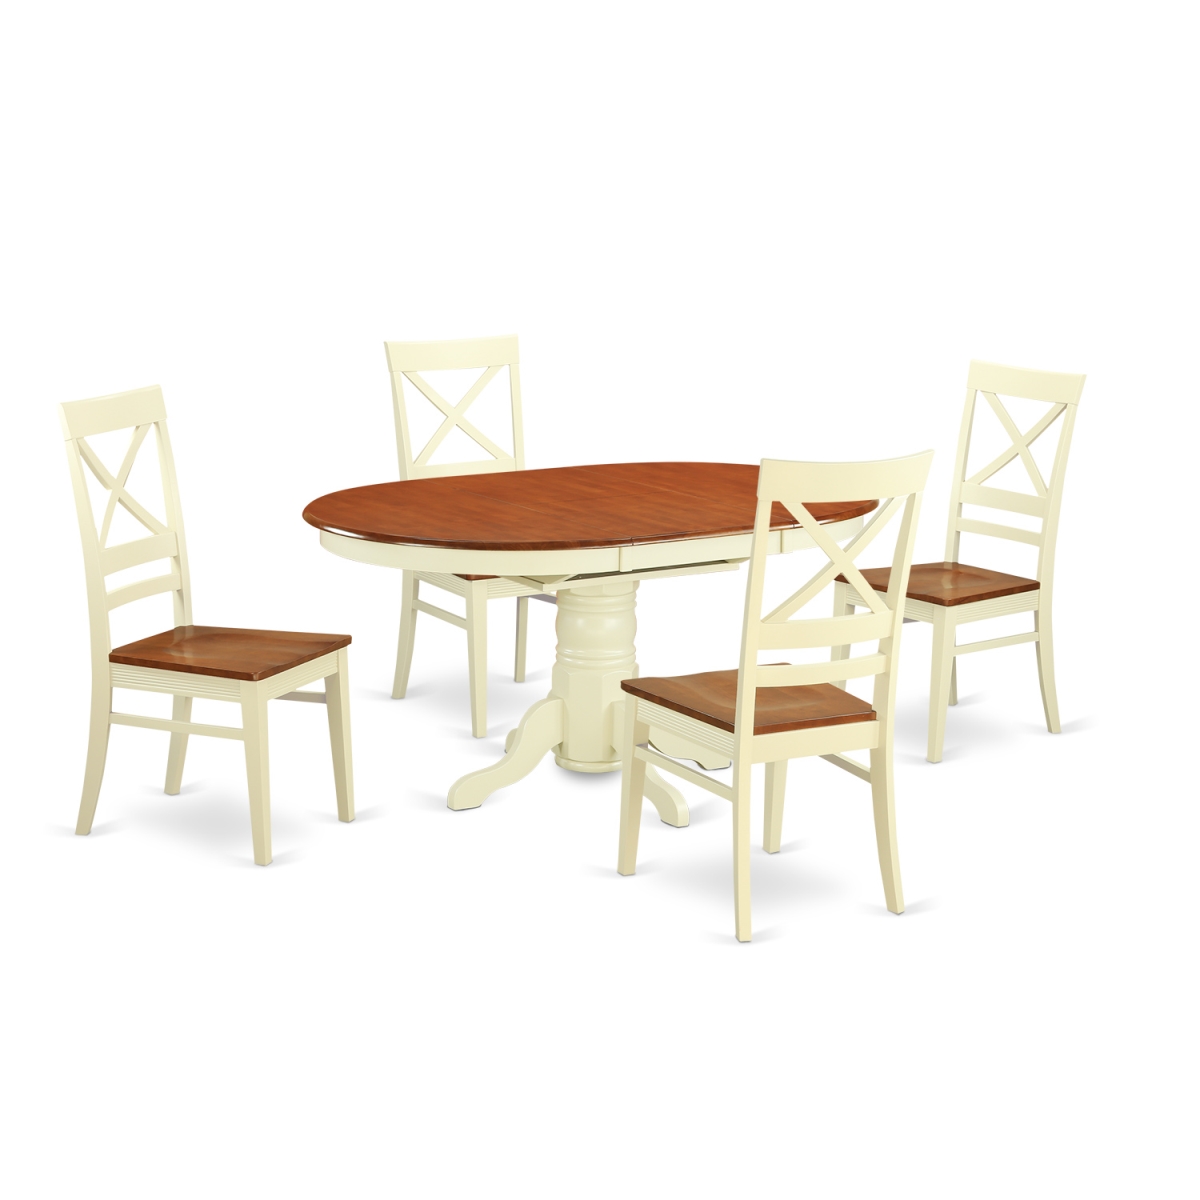 Picture of East West Furniture AVQU5-WHI-W Table & Chair Set - Dining Room Table & 4 Chairs, Buttermilk & Cherry - 5 Piece